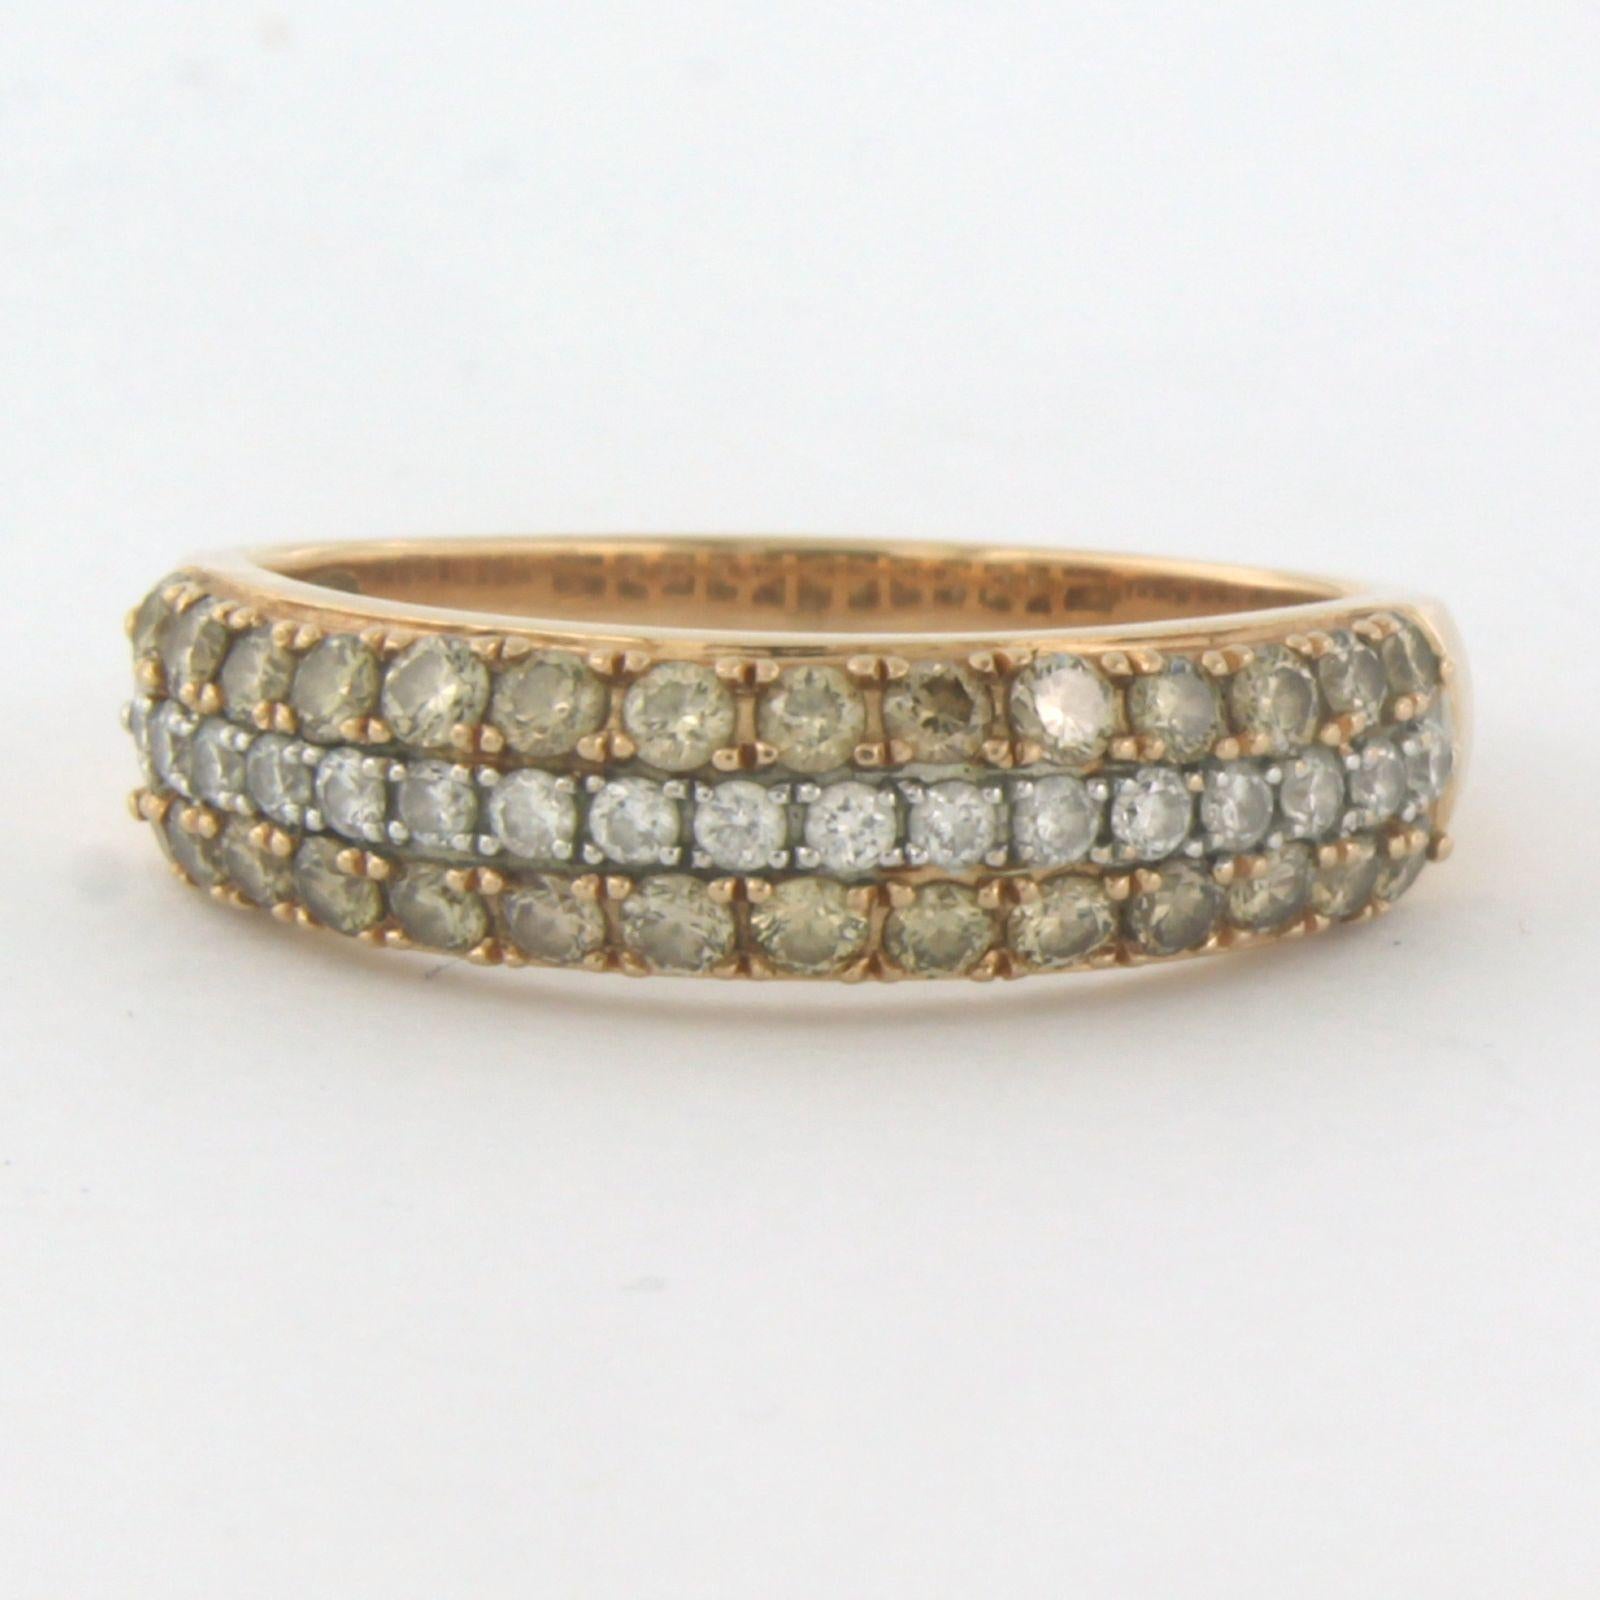 14k bicolour gold ring set with brilliant cut diamonds up to . 1.48ct - Champagne color, F/G - VS/SI - ring size U.S. 9 - EU. 19(60)

Detailed description

the top of the ring is 5.8 mm wide

Ring size US 9 - EU. 19(60), ring can be enlarged or